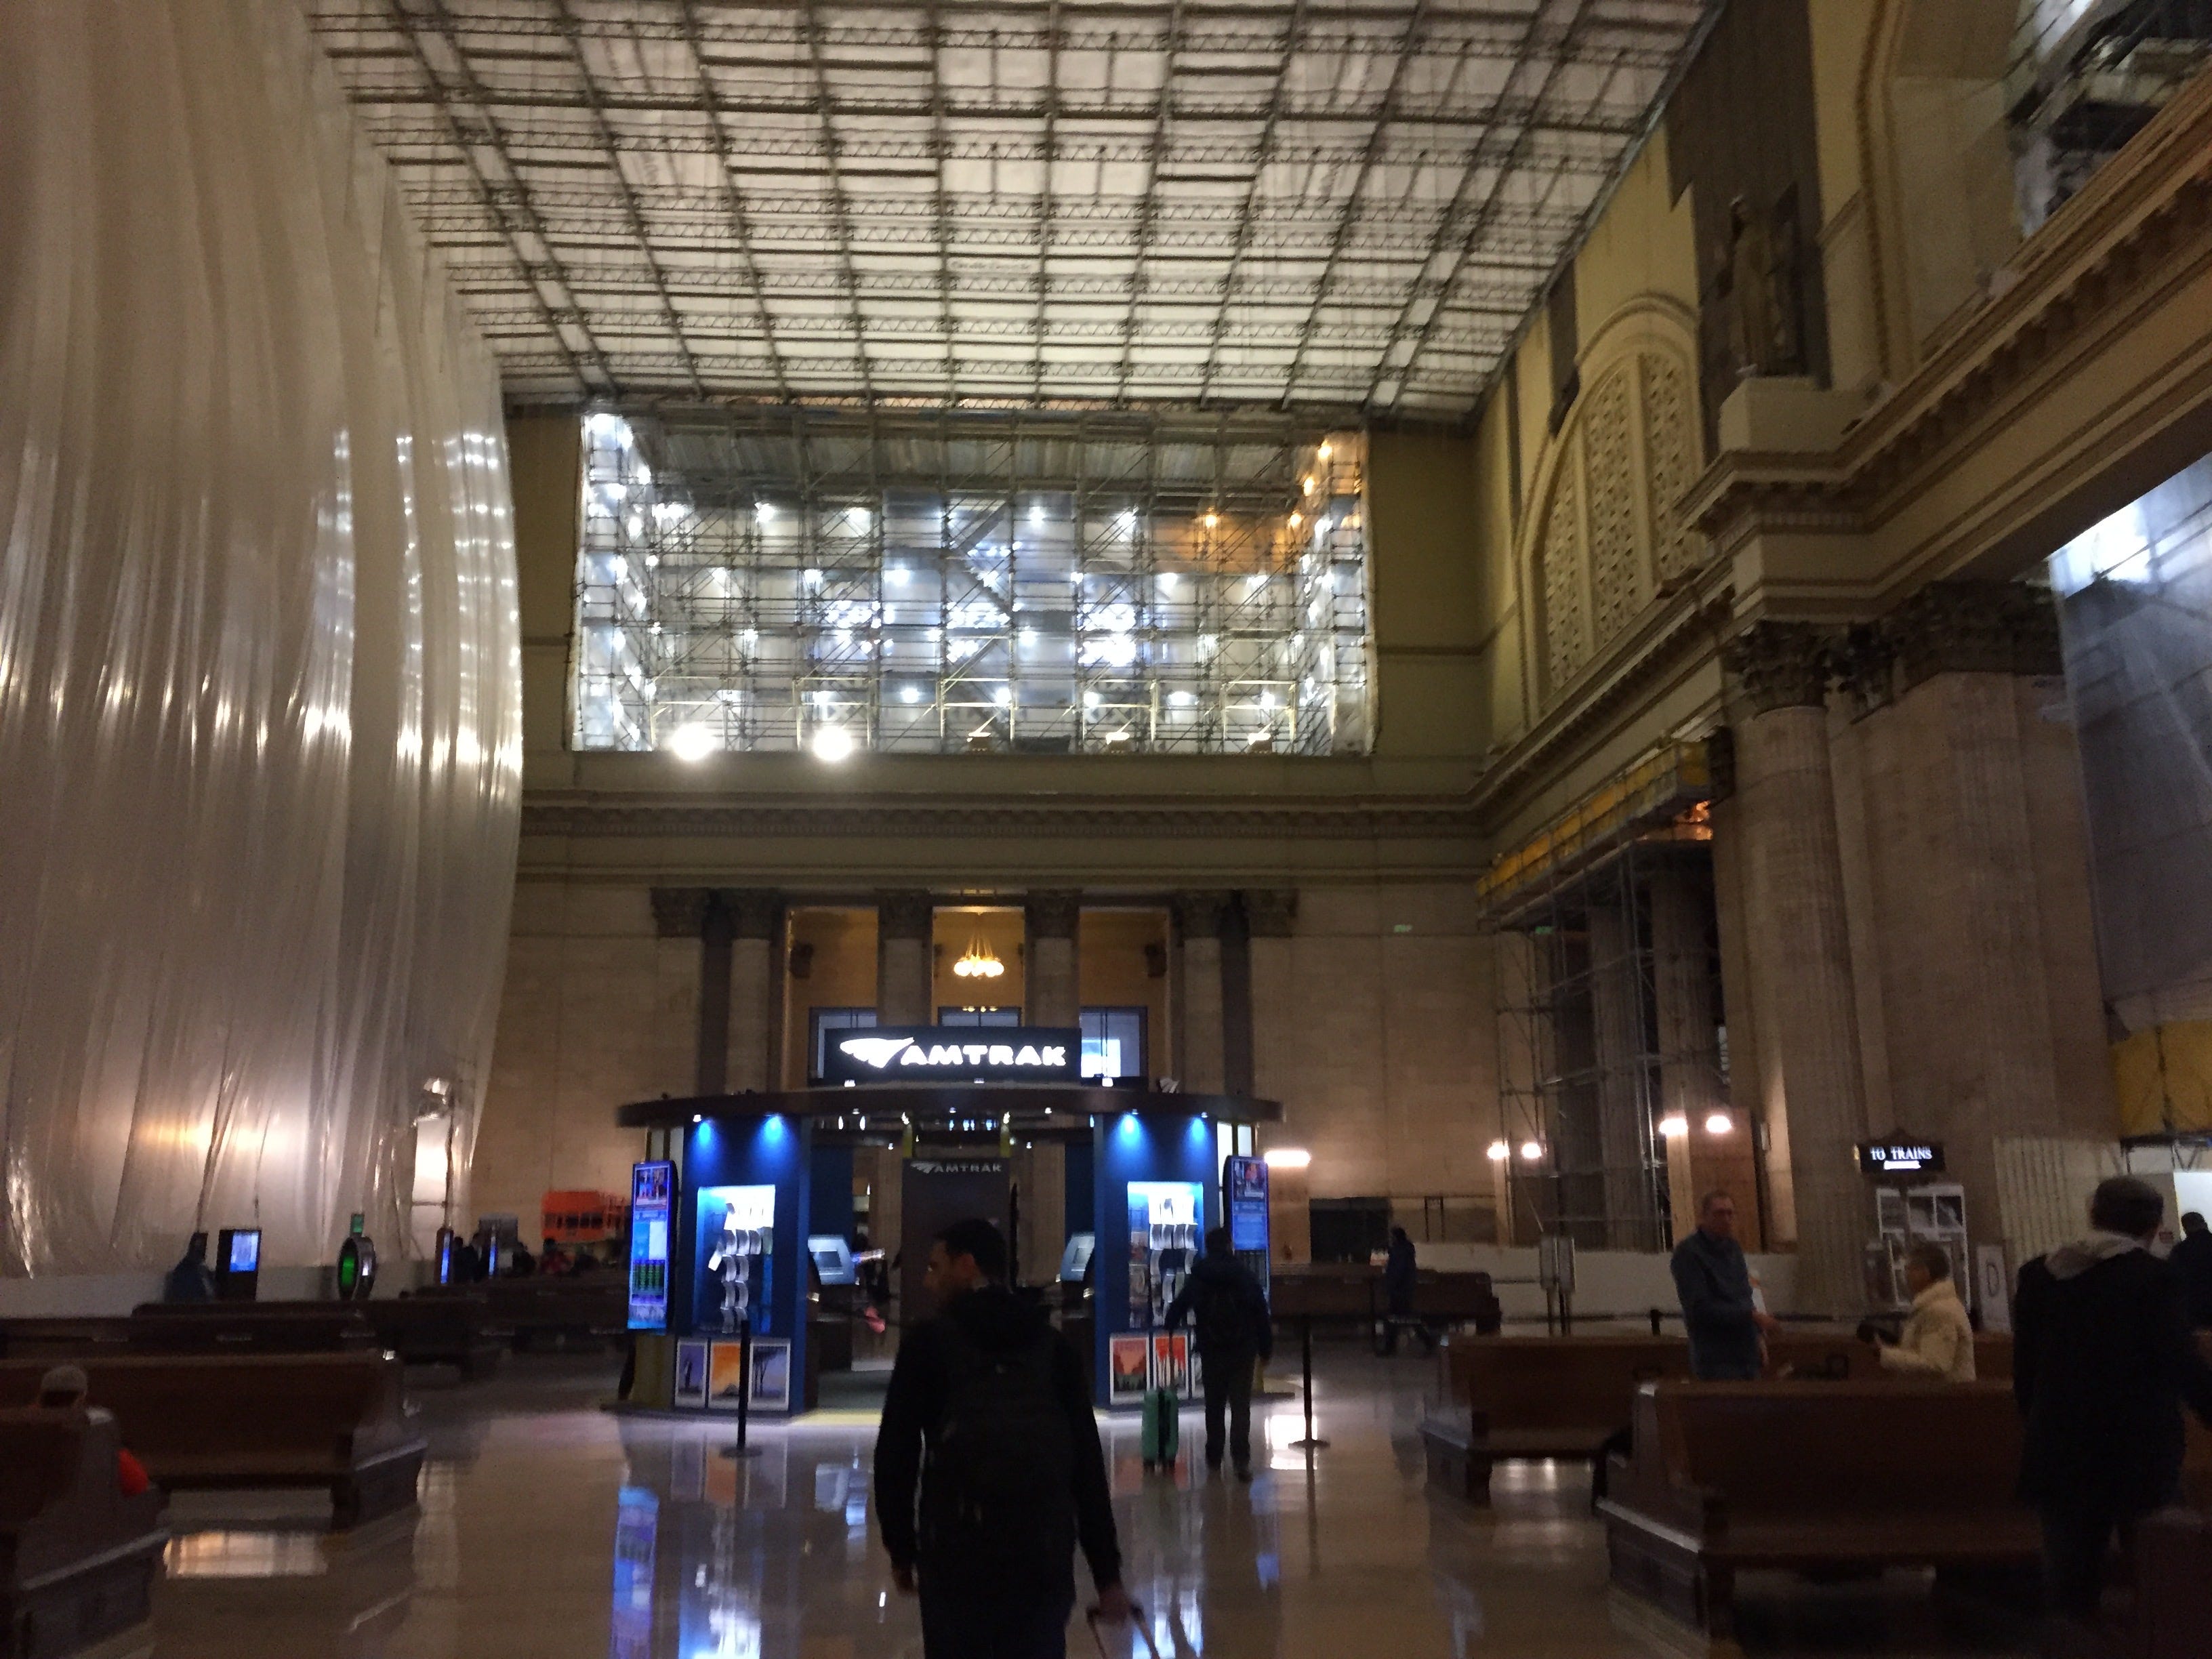 Union Station in Chicago.